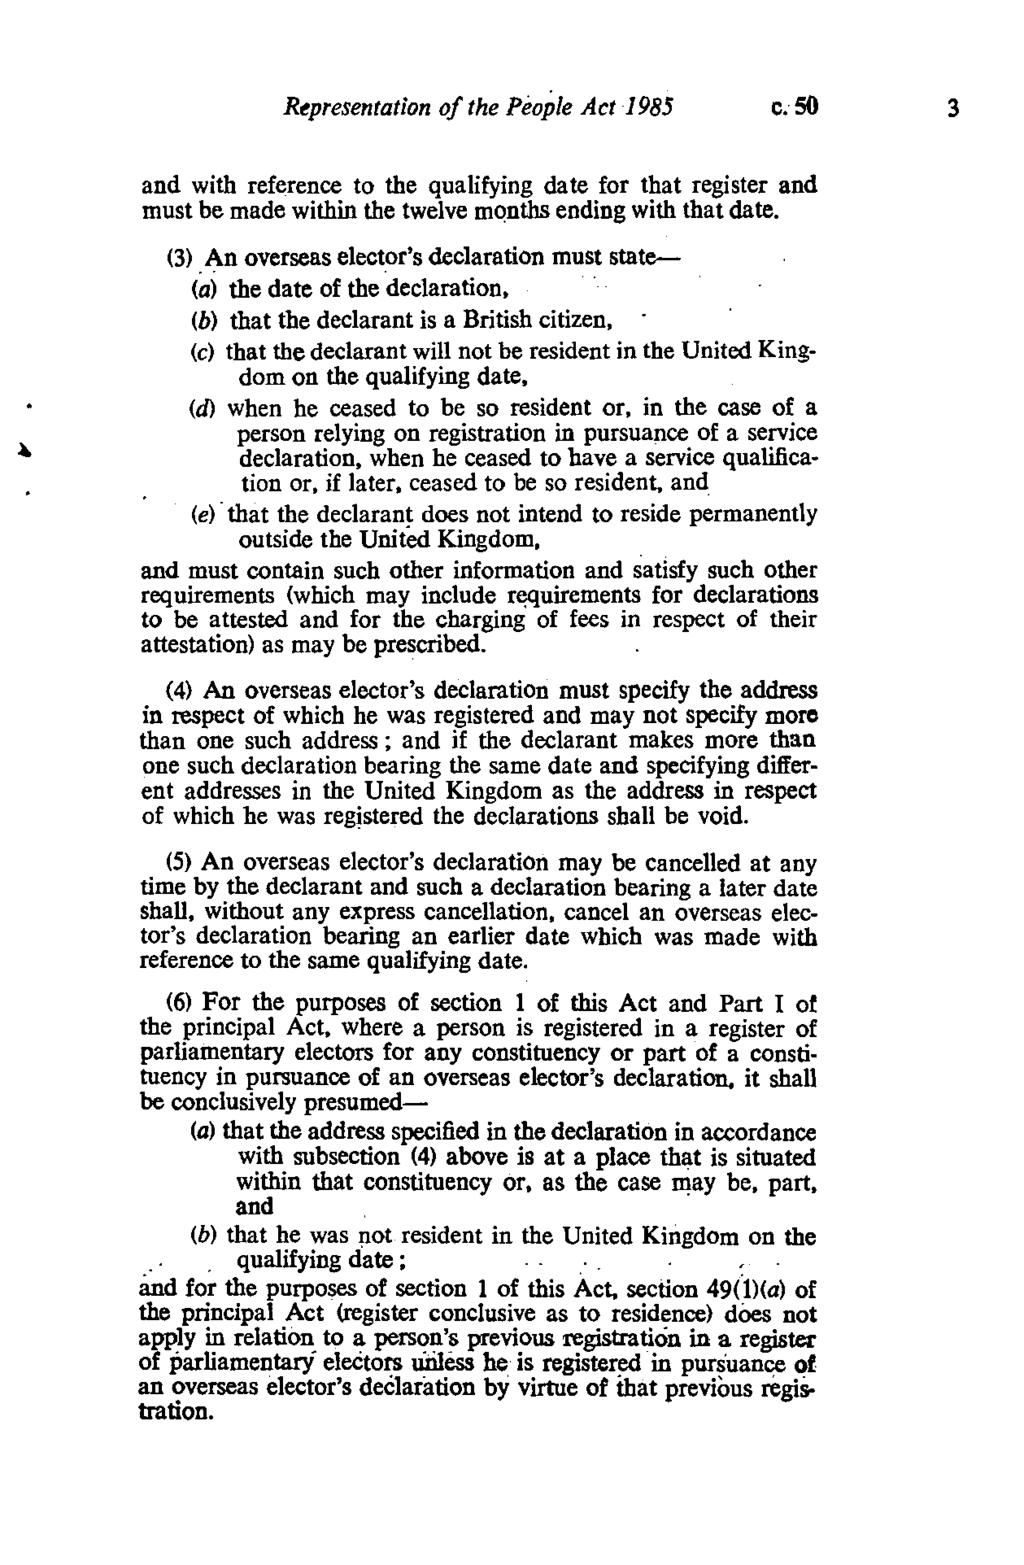 Rtpresentation of the People Act 1985 c.50 3 and with reference to the qualifying date for that register and must be made within the twelve mqnths ending with that date.